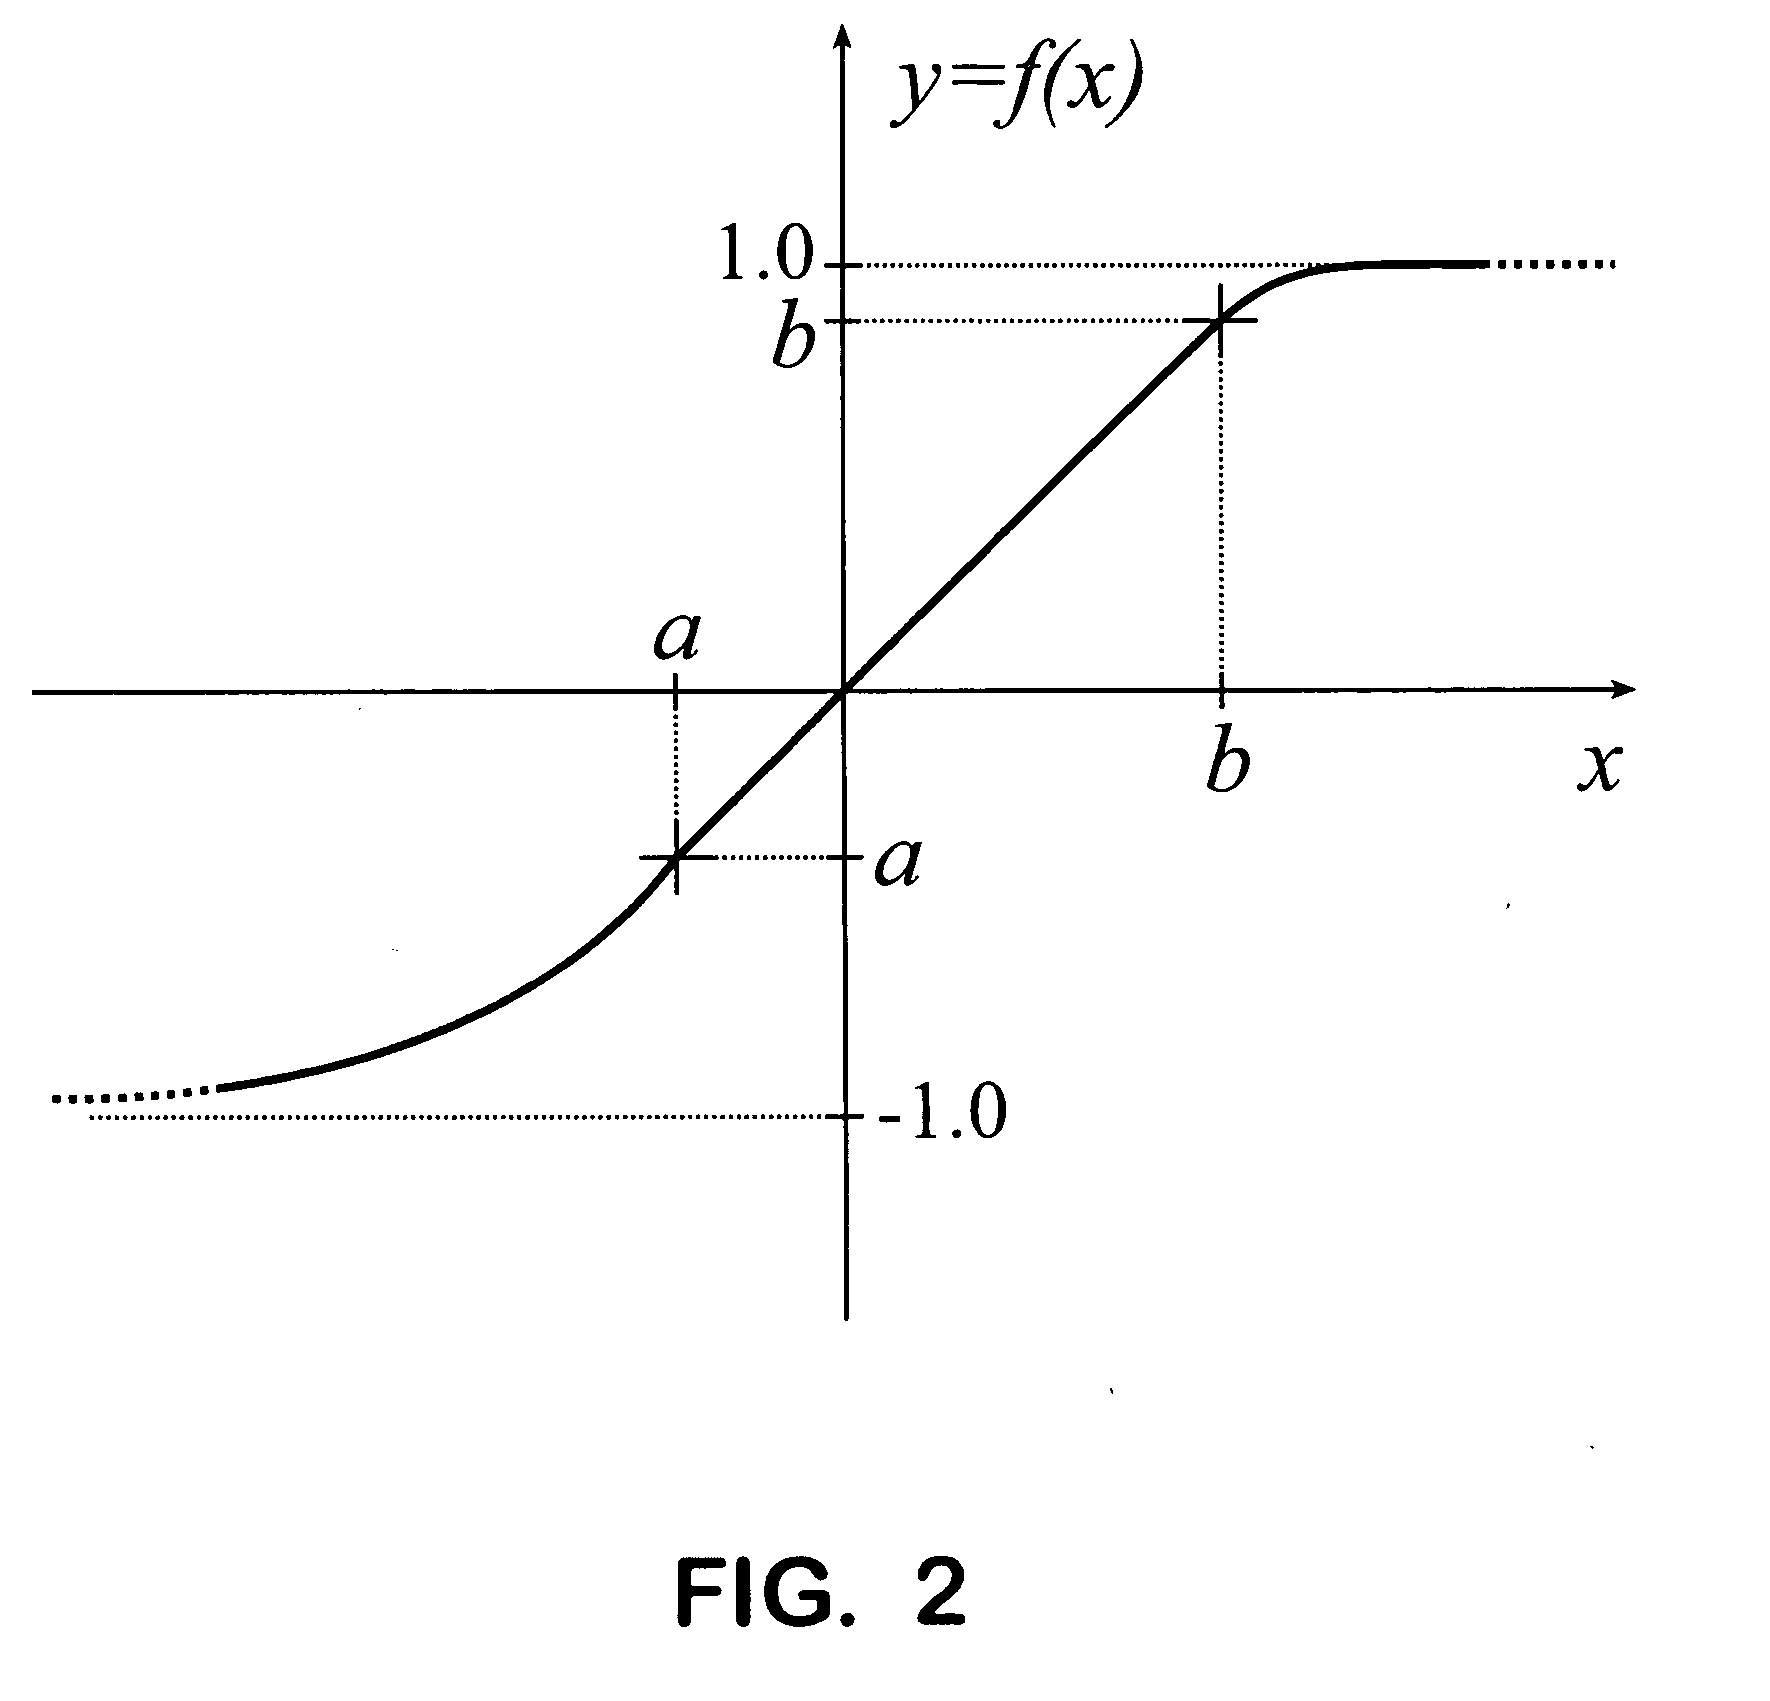 Method and Apparatus for Distortion of Audio Signals and Emulation of Vacuum Tube Amplifiers